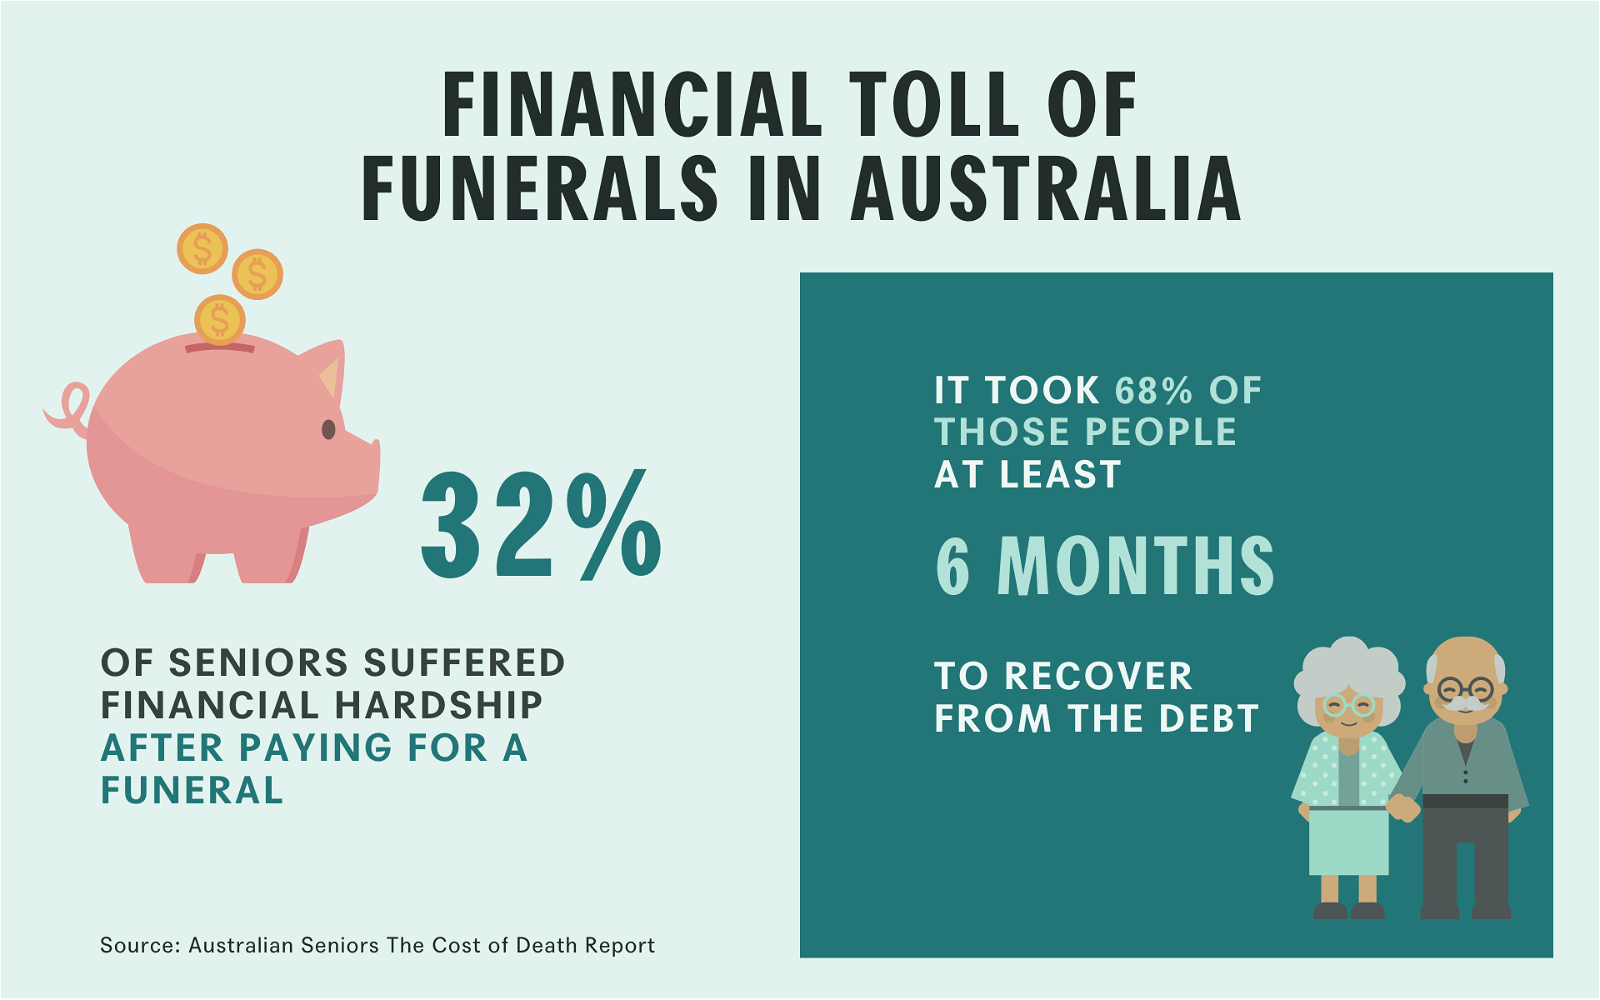 Prepaid funeral plans can safeguard families from financial hardship